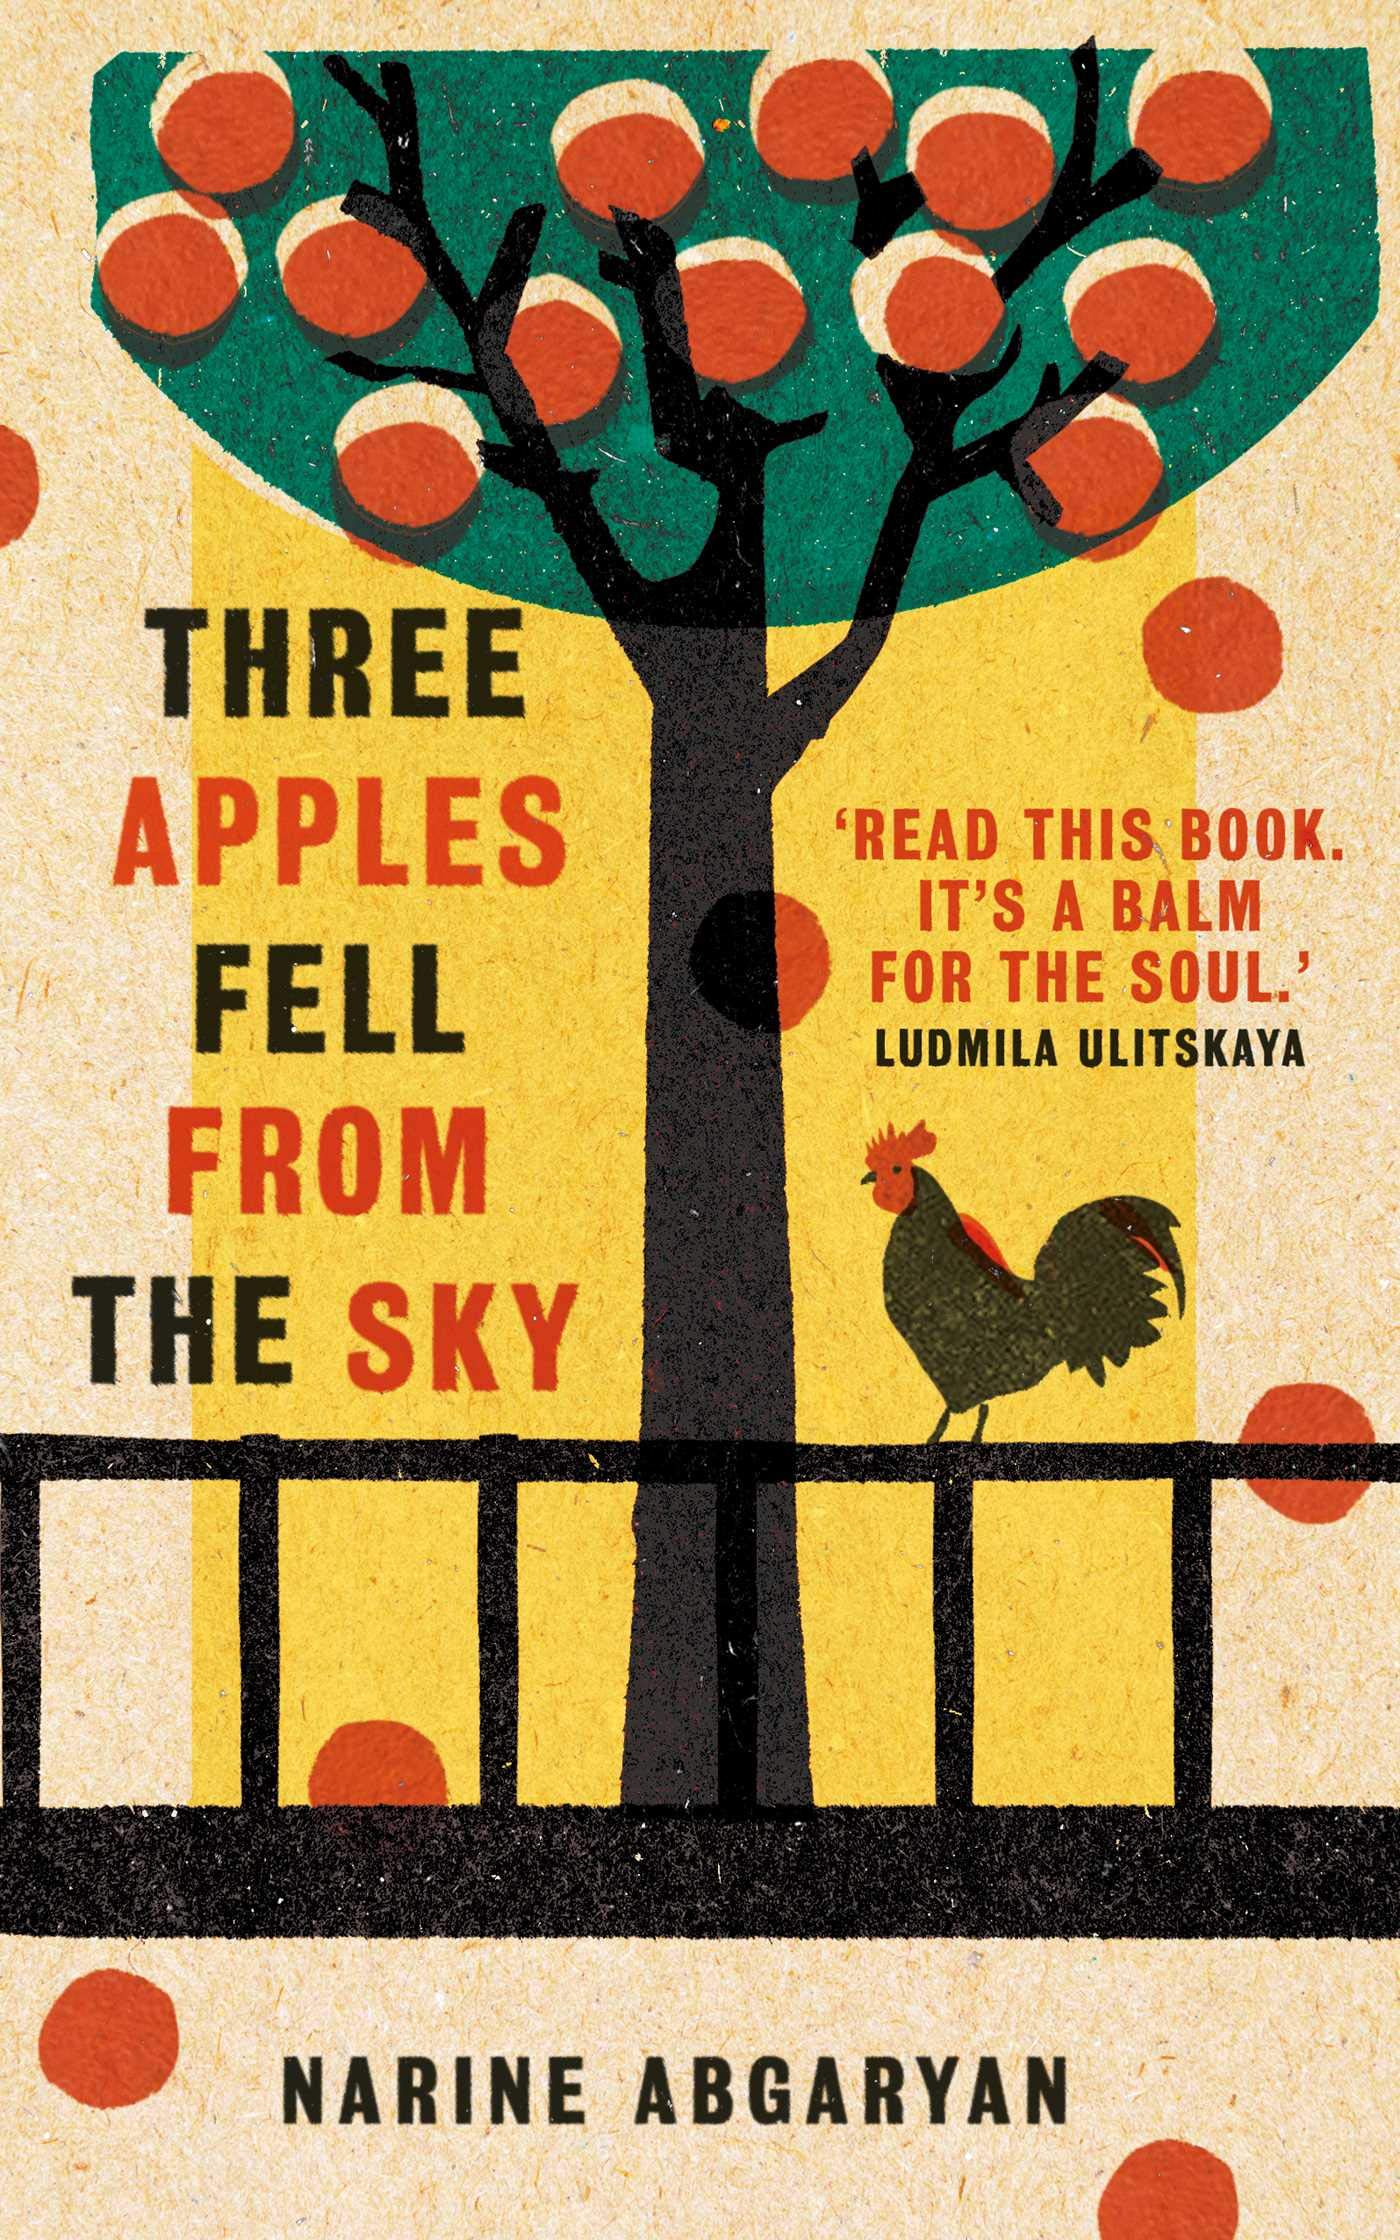 Review: Three Apples Fell From the Sky